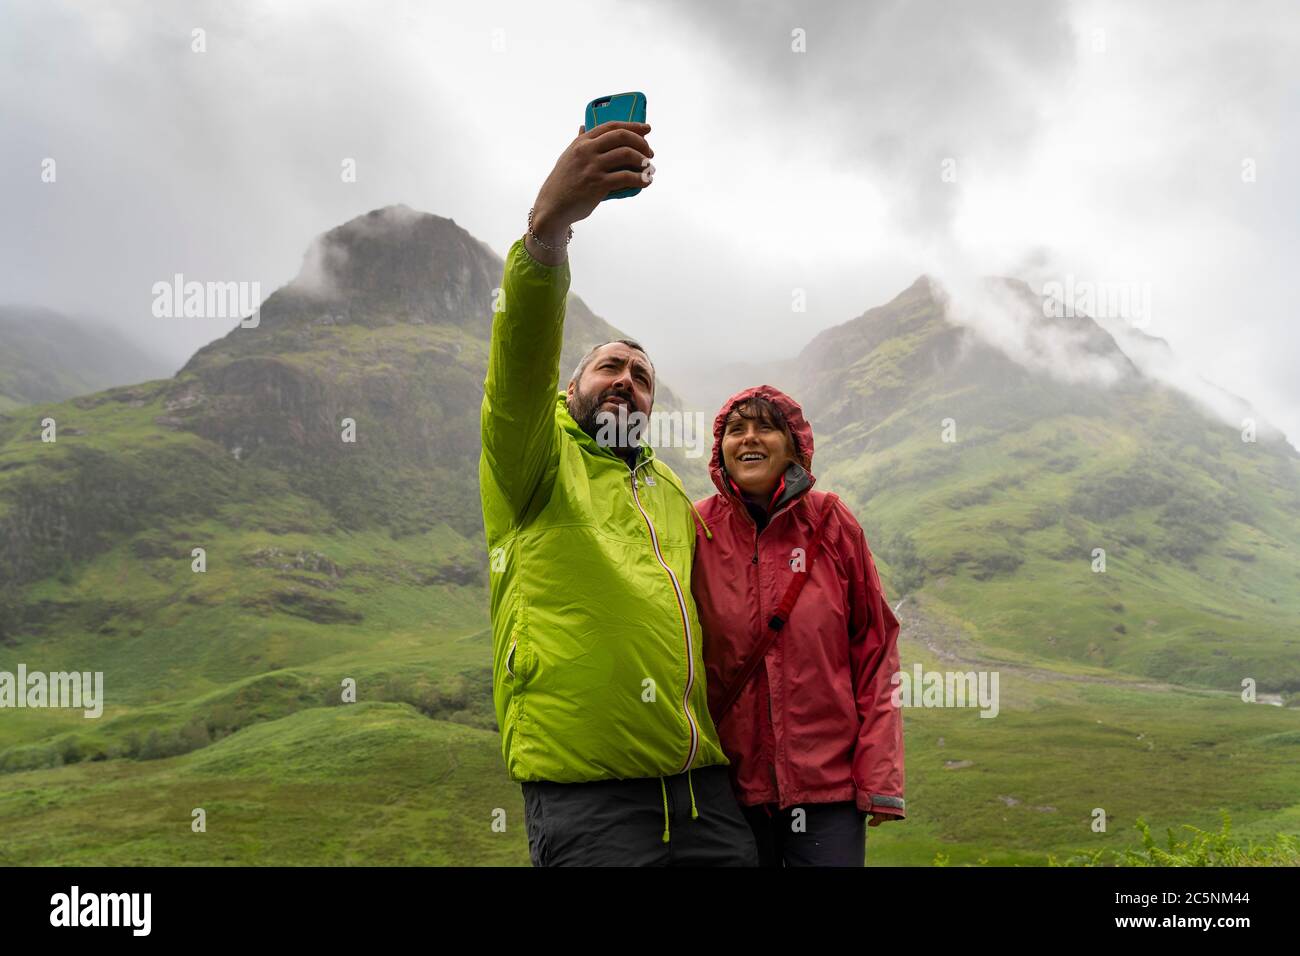 Glen Coe, Scotland, UK. 4 July, 2020. Tourists travel to Glen Coe on first weekend after 5 mile travel restriction was lifted by the Scottish Government. Pictured; couple take selfie photograph with spectacular mountain backdrop in Glen Coe.  Iain Masterton/Alamy Live News Stock Photo